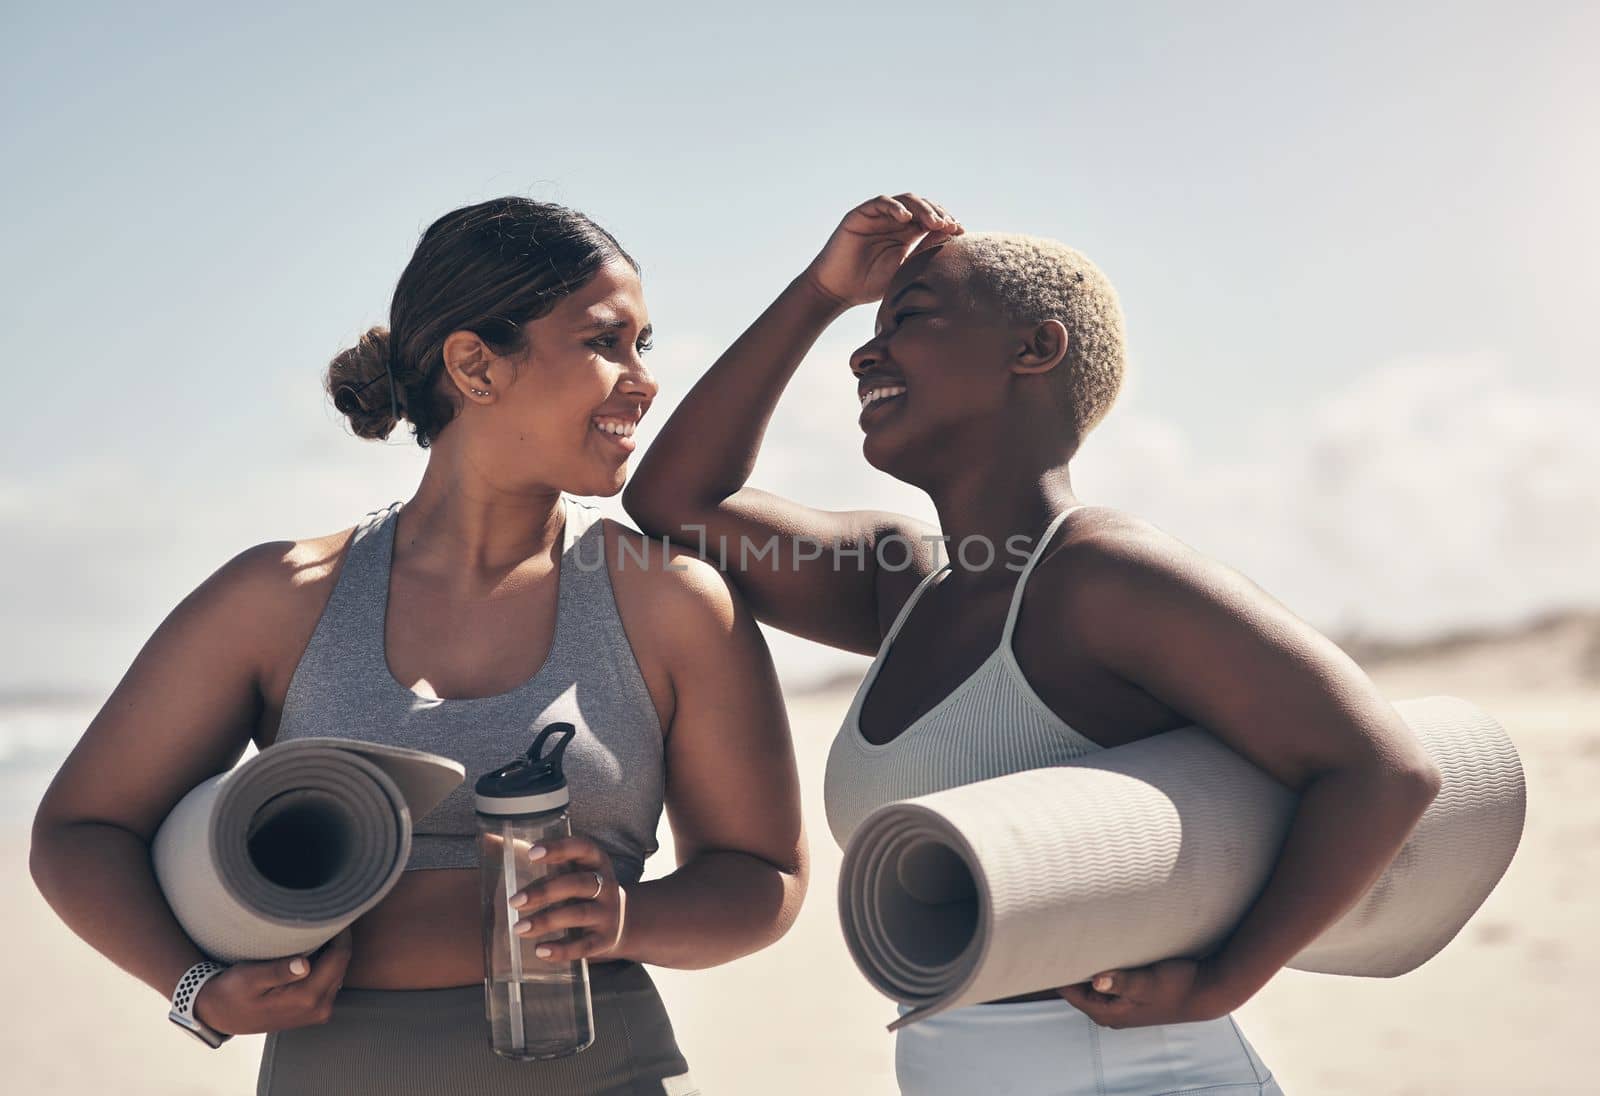 Yoga allows us to move at our own pace. two young women holding their yoga mats while on the beach